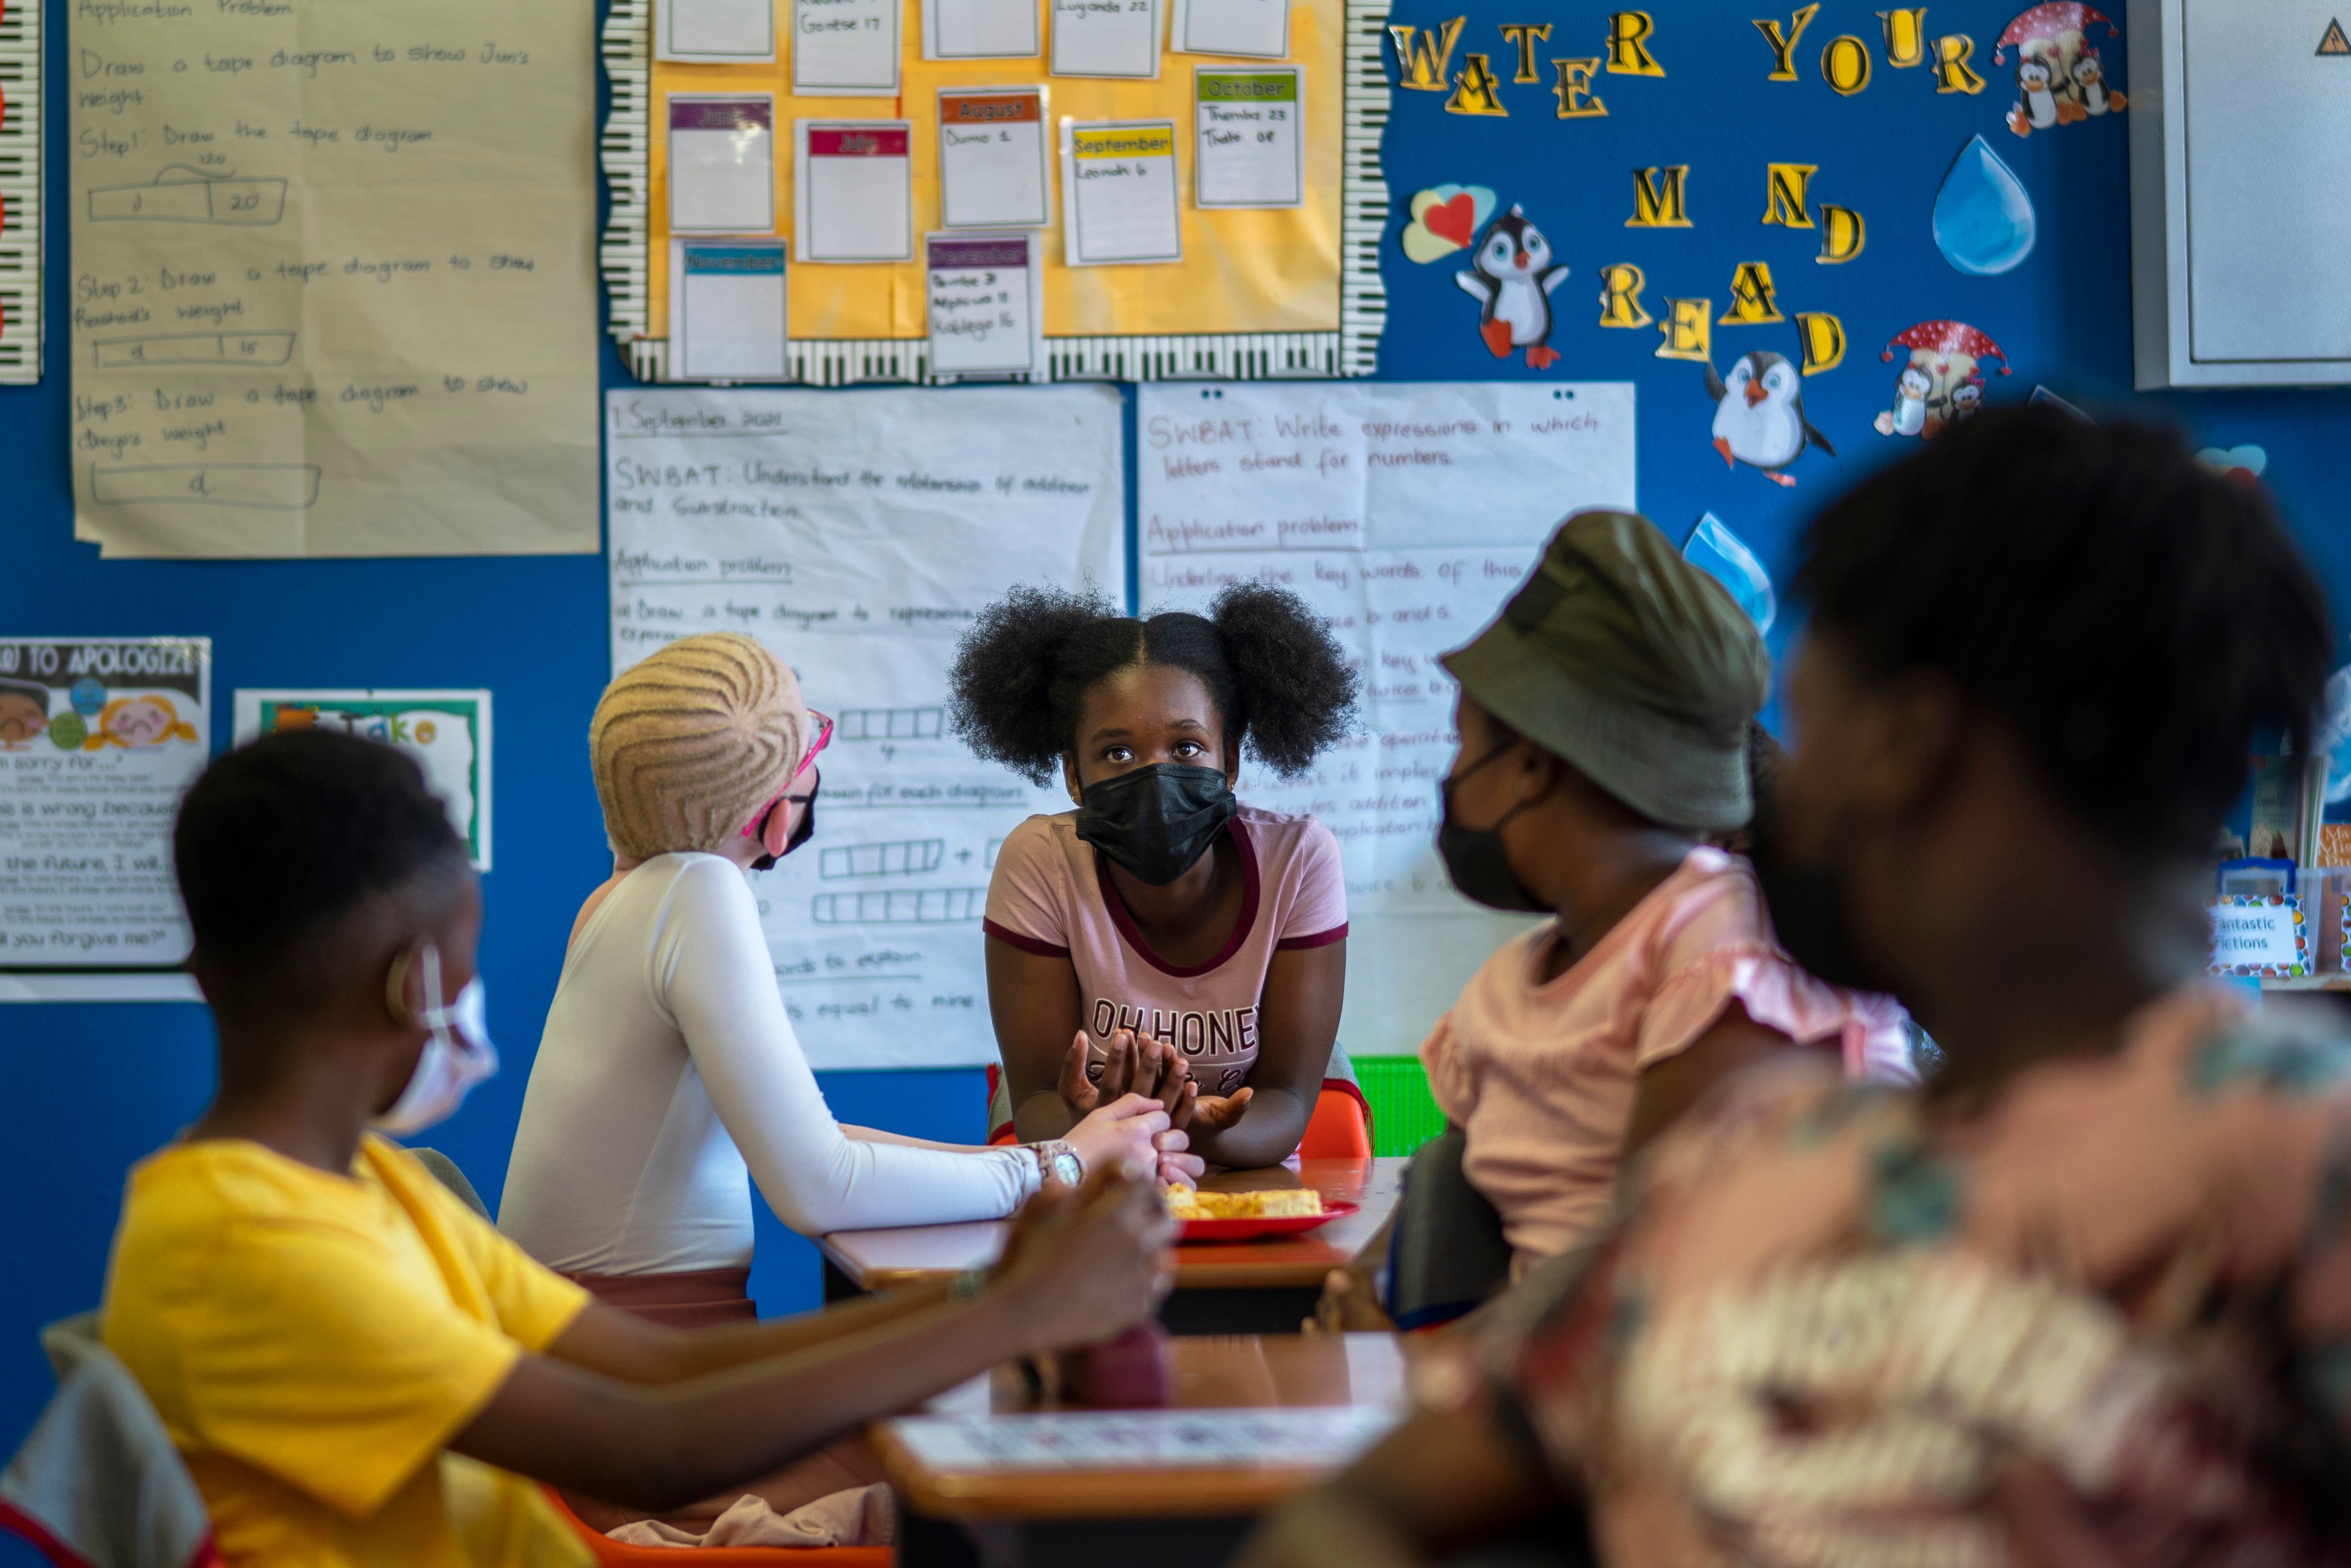 Pupils wearing masks study at the Kgololo Academy in Johannesburg's Alexandra township on Tuesday